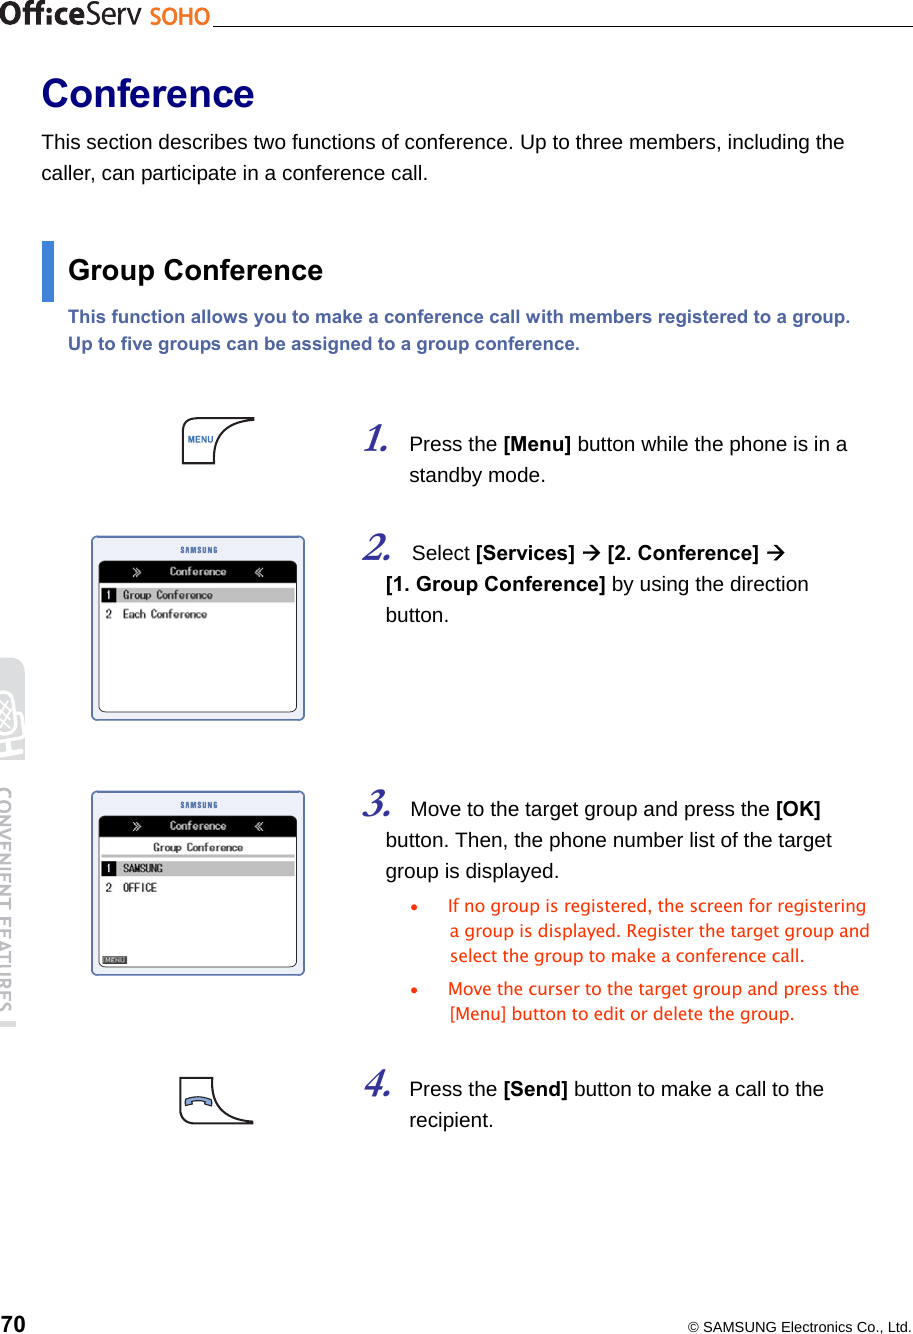    70  © SAMSUNG Electronics Co., Ltd. Conference This section describes two functions of conference. Up to three members, including the caller, can participate in a conference call.  Group Conference This function allows you to make a conference call with members registered to a group. Up to five groups can be assigned to a group conference.   1. Press the [Menu] button while the phone is in a standby mode.    2. Select [Services]  [2. Conference]   [1. Group Conference] by using the direction button.      3. Move to the target group and press the [OK] button. Then, the phone number list of the target group is displayed. •  If no group is registered, the screen for registering a group is displayed. Register the target group and select the group to make a conference call.   •  Move the curser to the target group and press the [Menu] button to edit or delete the group.  4. Press the [Send] button to make a call to the recipient.   